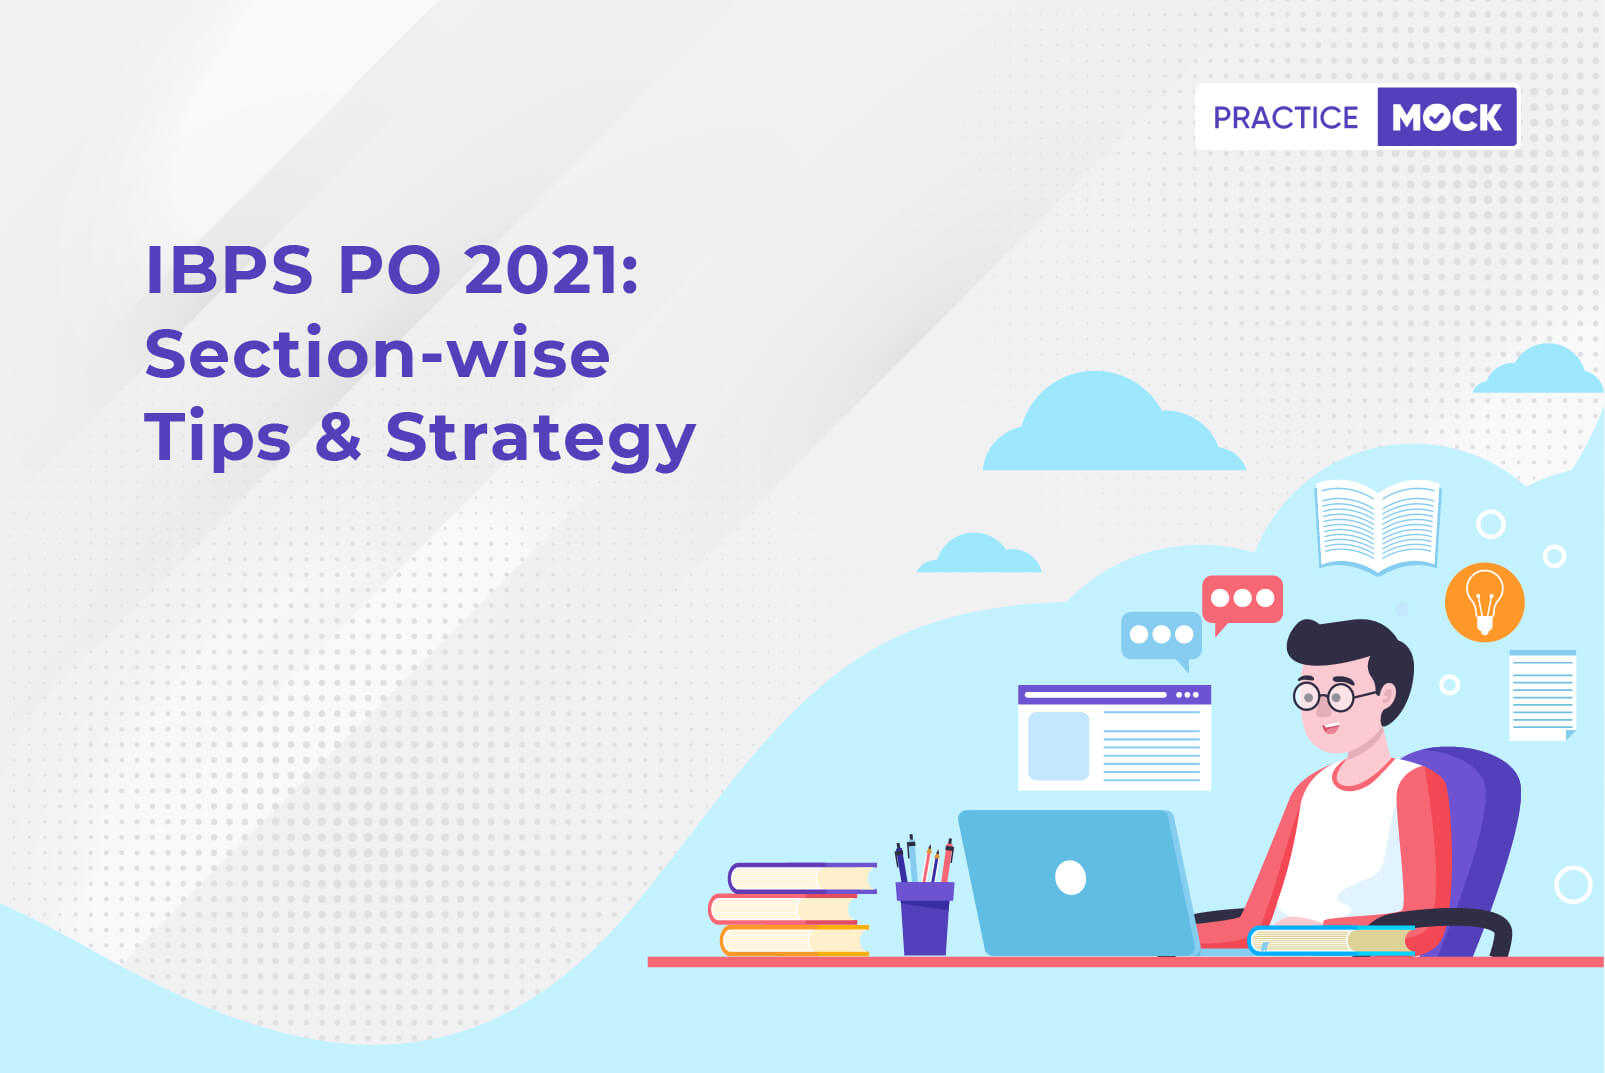 IBPS PO 2021-Section-wise Tips & Strategy